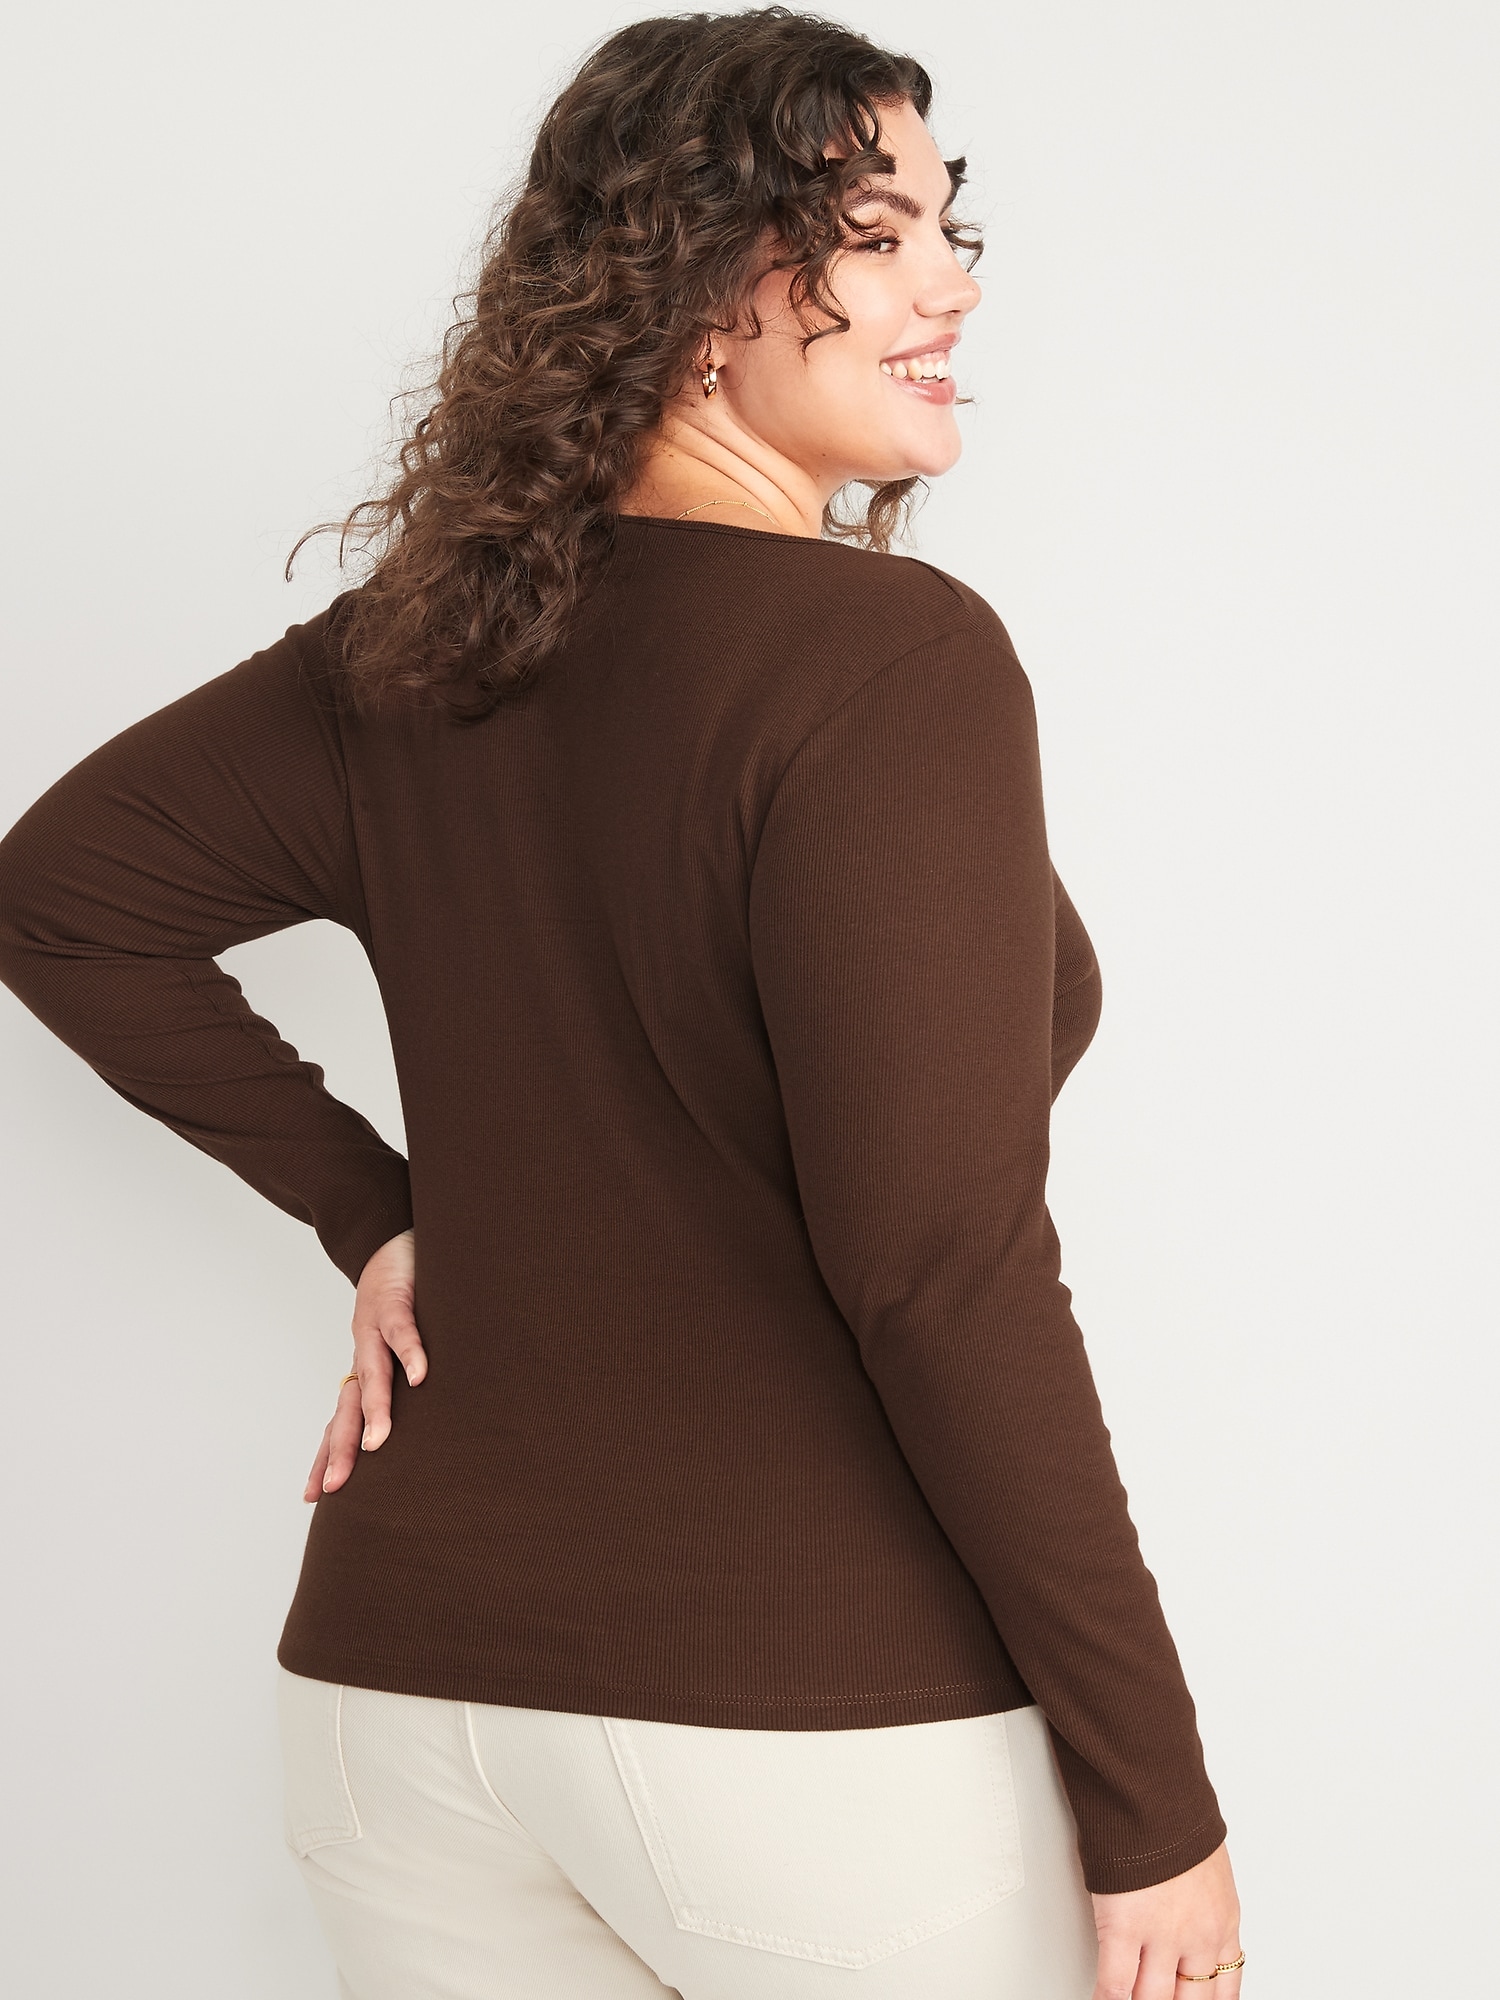 Fitted Long-Sleeve Rib-Knit Top for Women | Old Navy